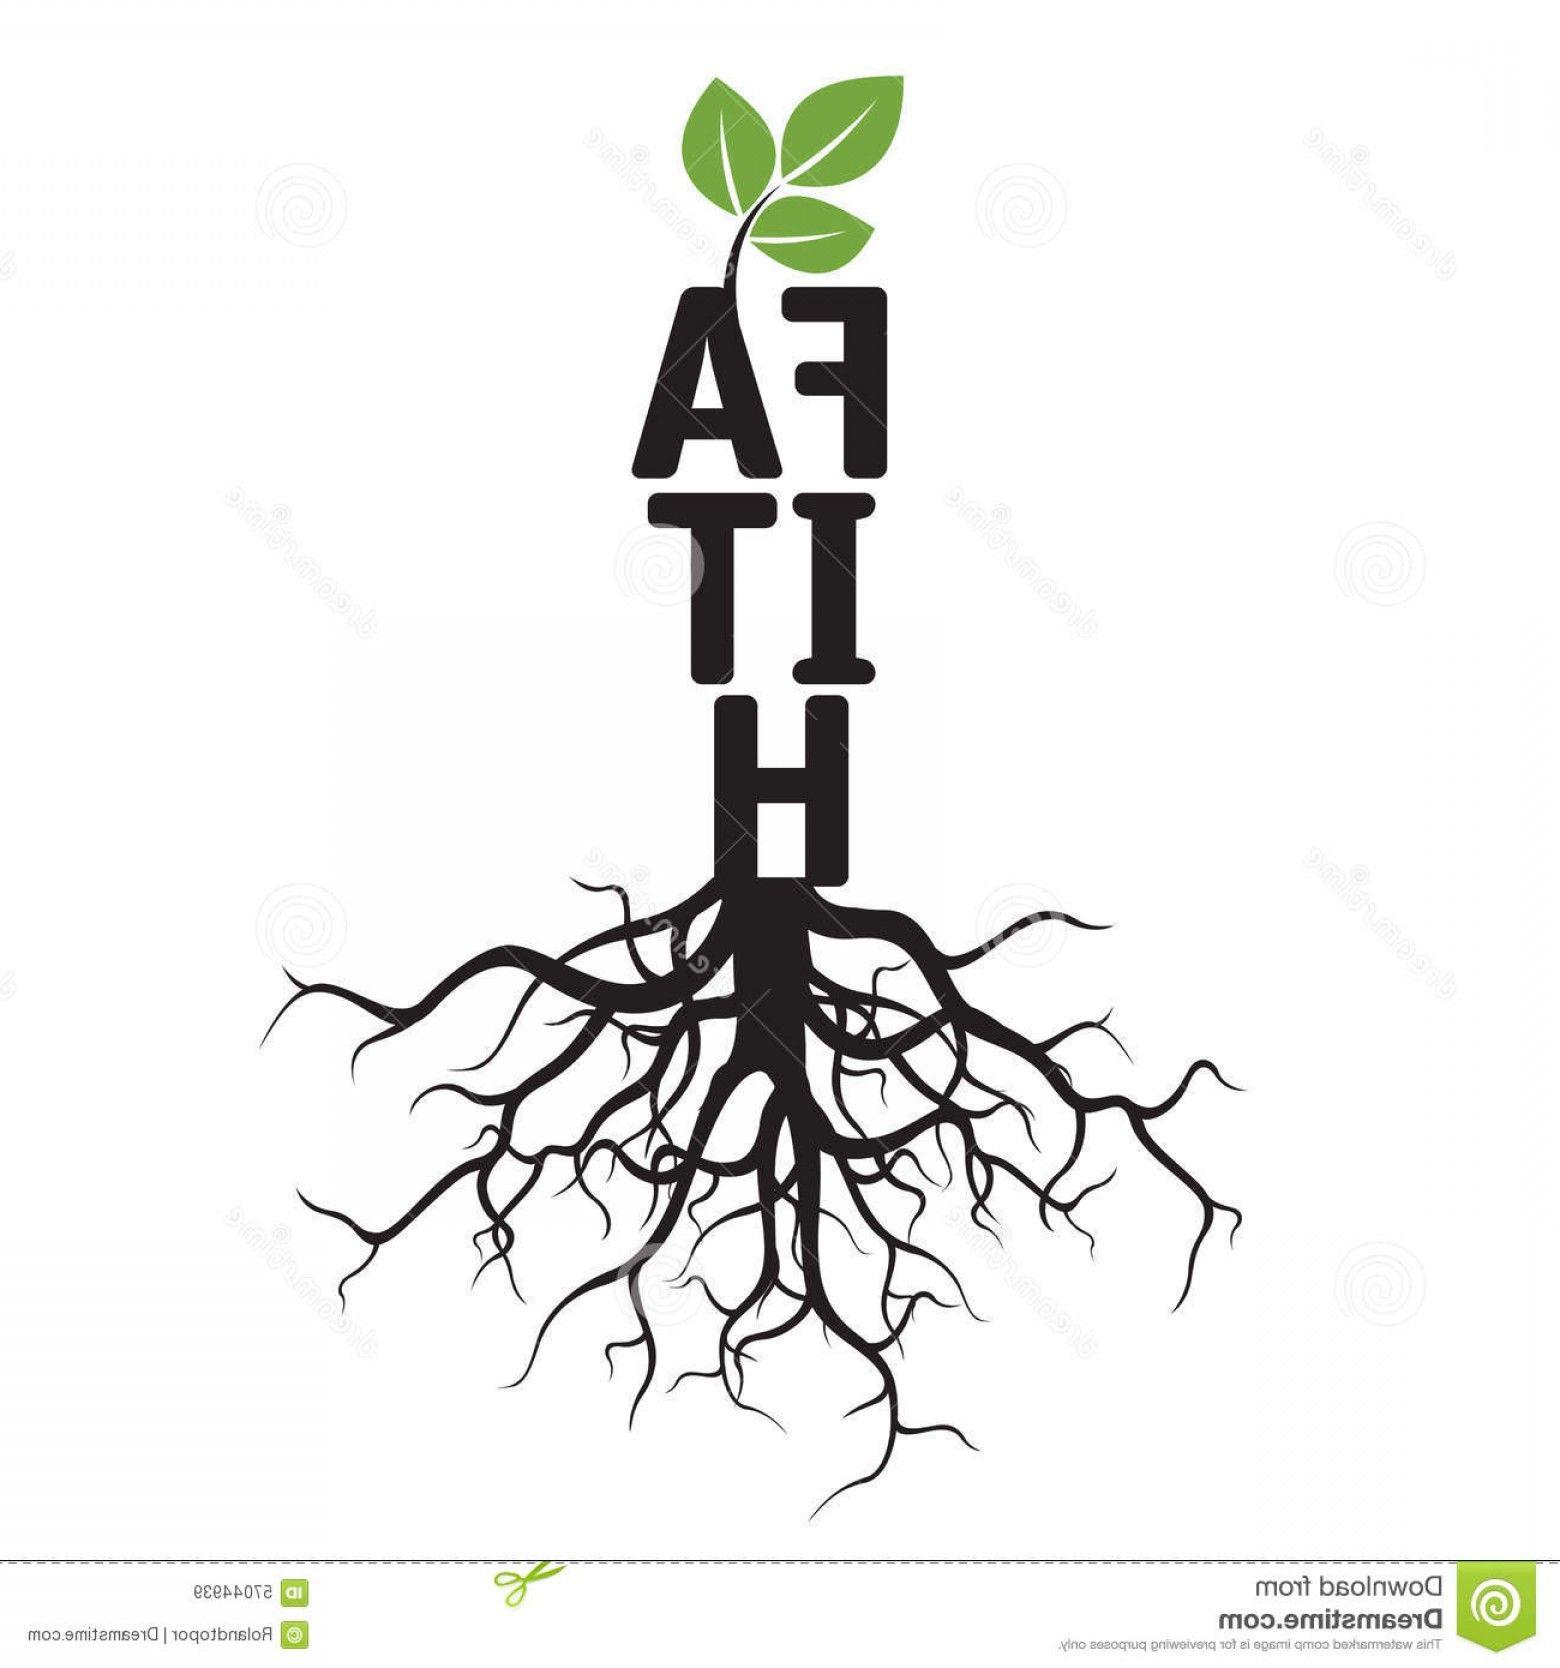 Black Tree with Roots Logo - Stock Illustration Black Tree Roots Text Faith Vector Illustration ...